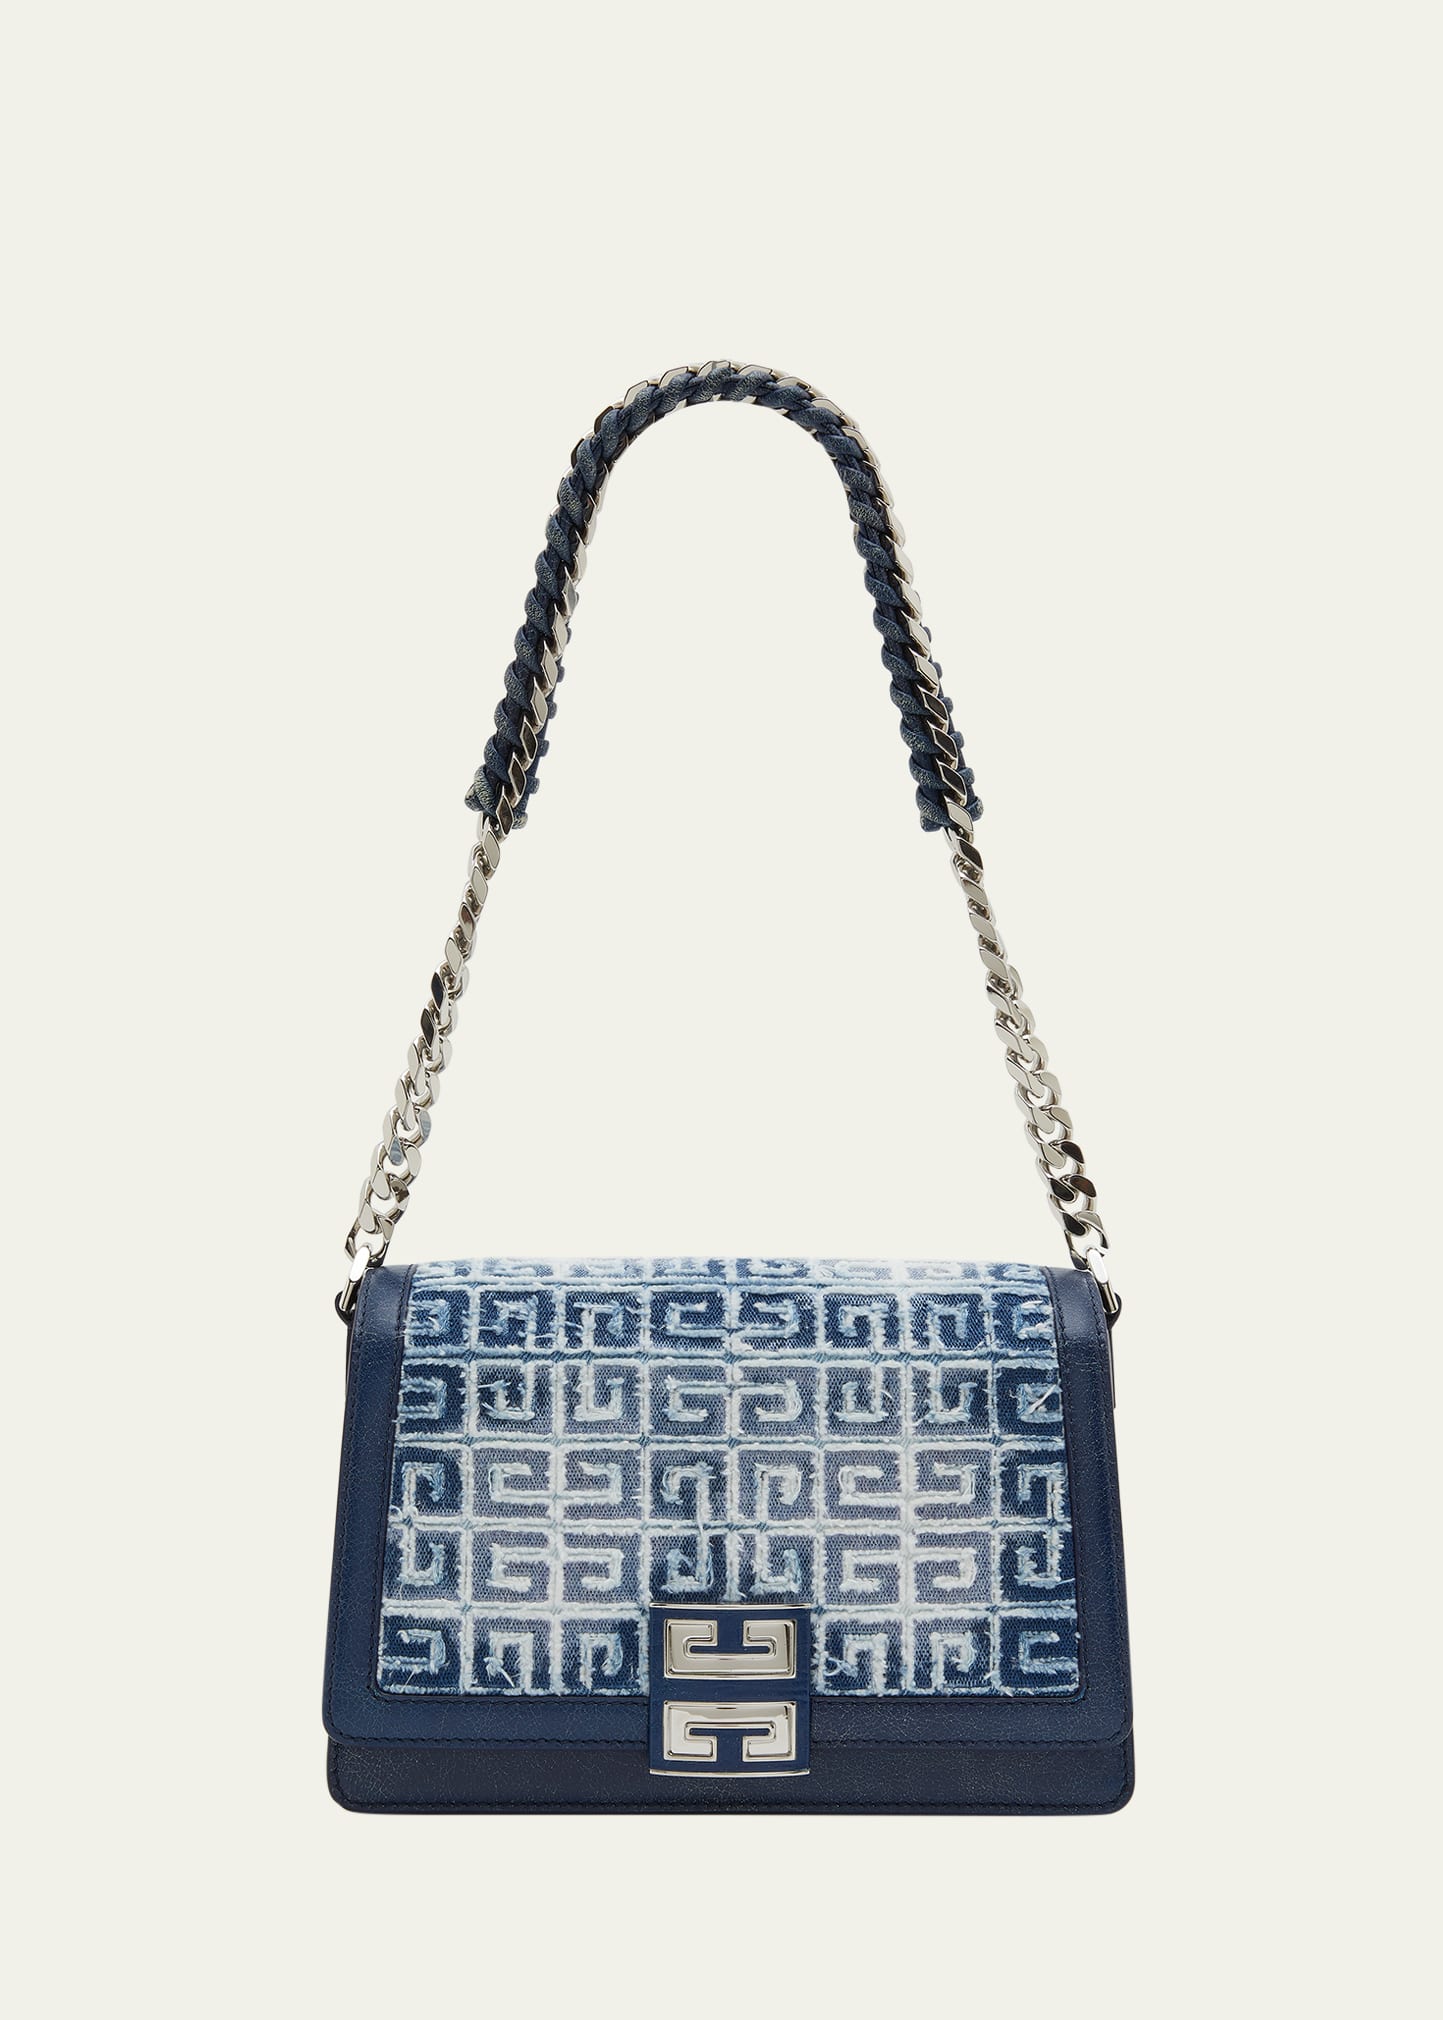 Givenchy 4g Shoulder Bag In Distressed Denim With Woven Chain Strap In 420 Medium Blue